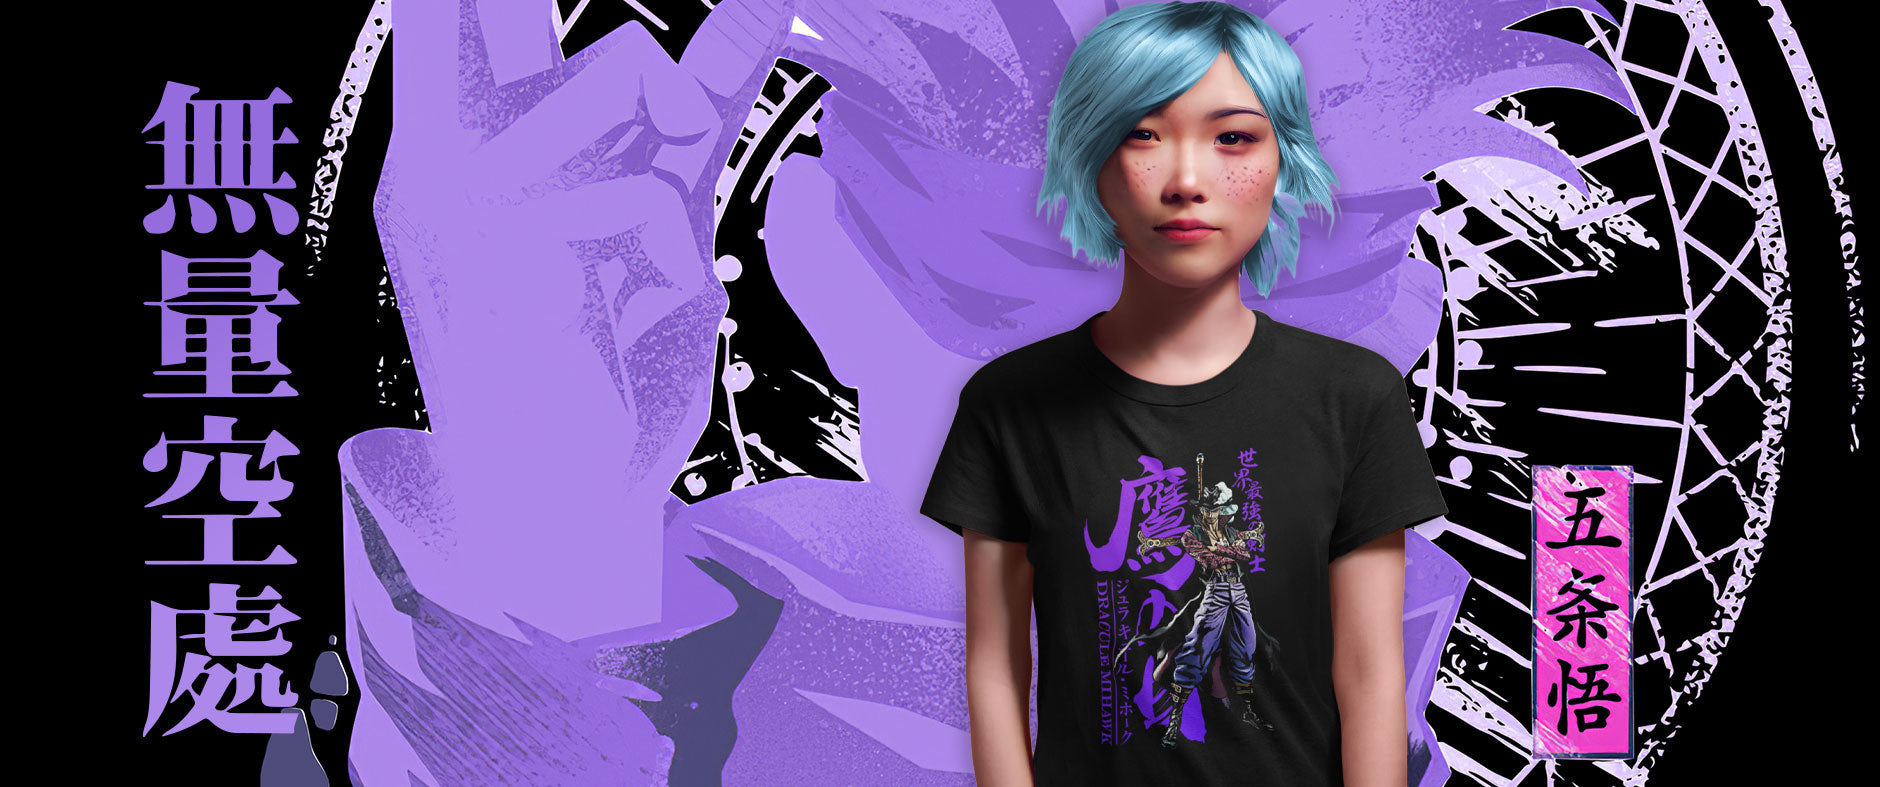 Introducing our exciting Manga t-shirt collection for Adults & Kids